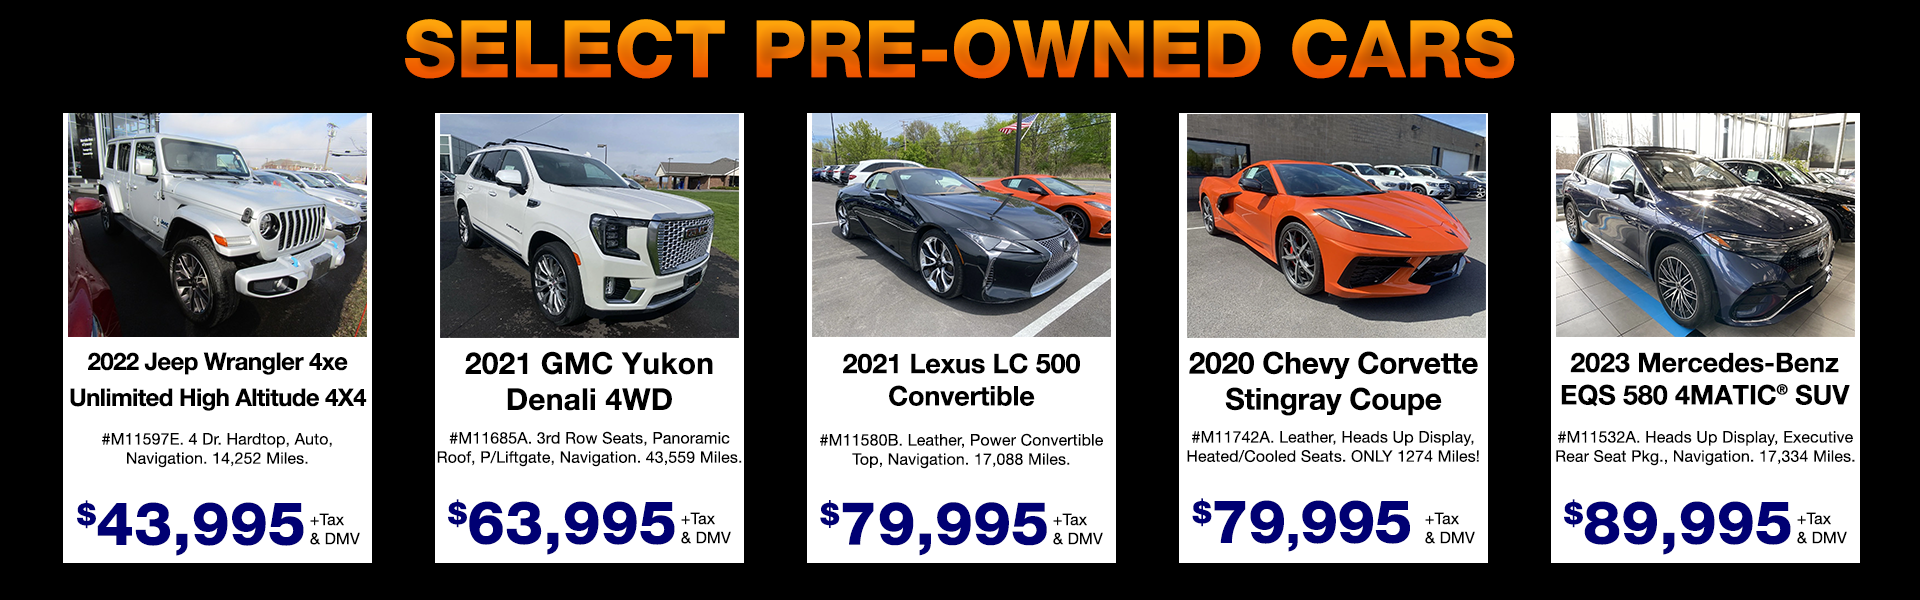 Select Pre-Owned 